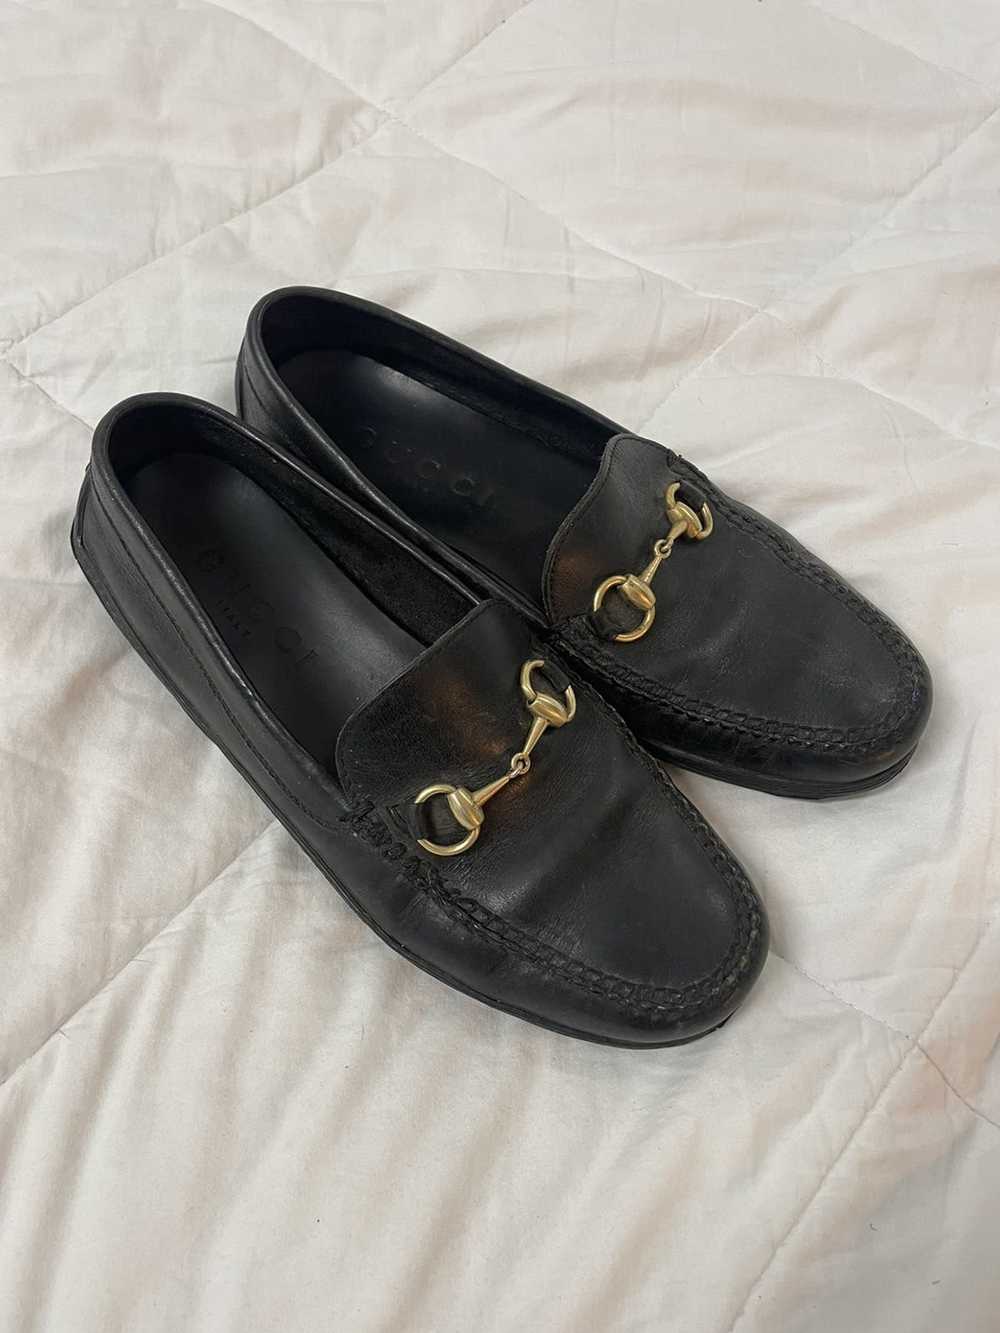 Gucci Gucci Leather Horsebit Loafer - image 1